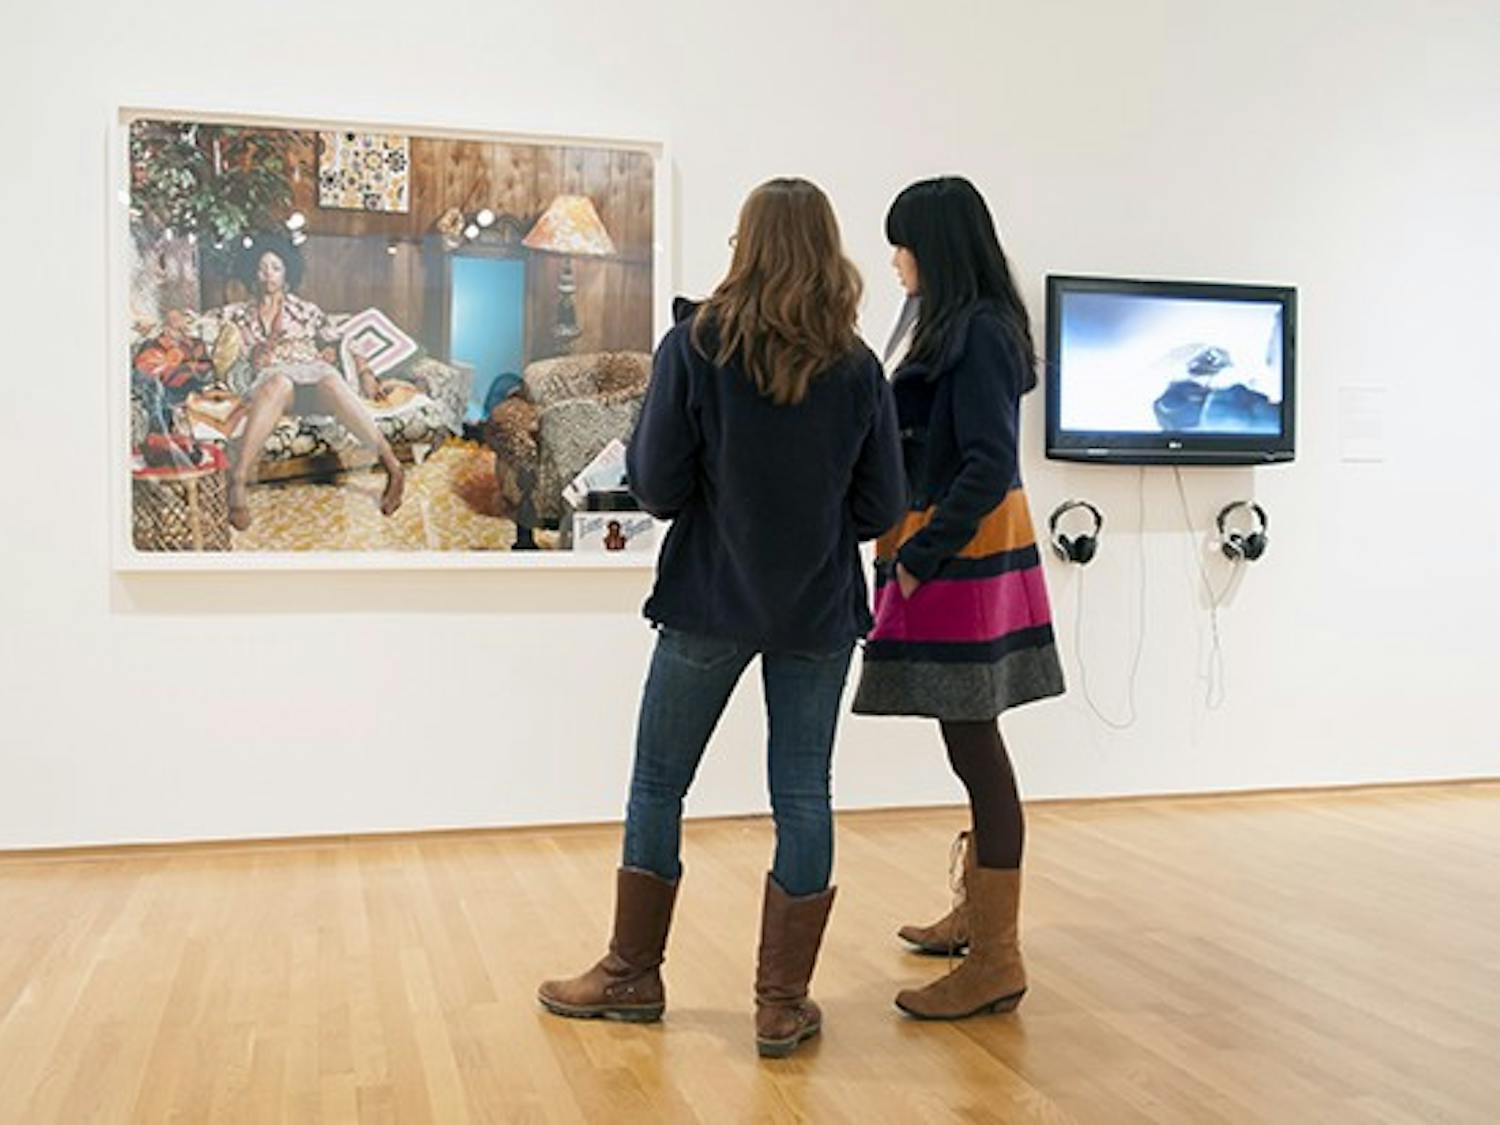 At the Nasher Museum of Art, students from the School of Medicine study art as part of an interdisciplinary effort to enhance communication with patients.